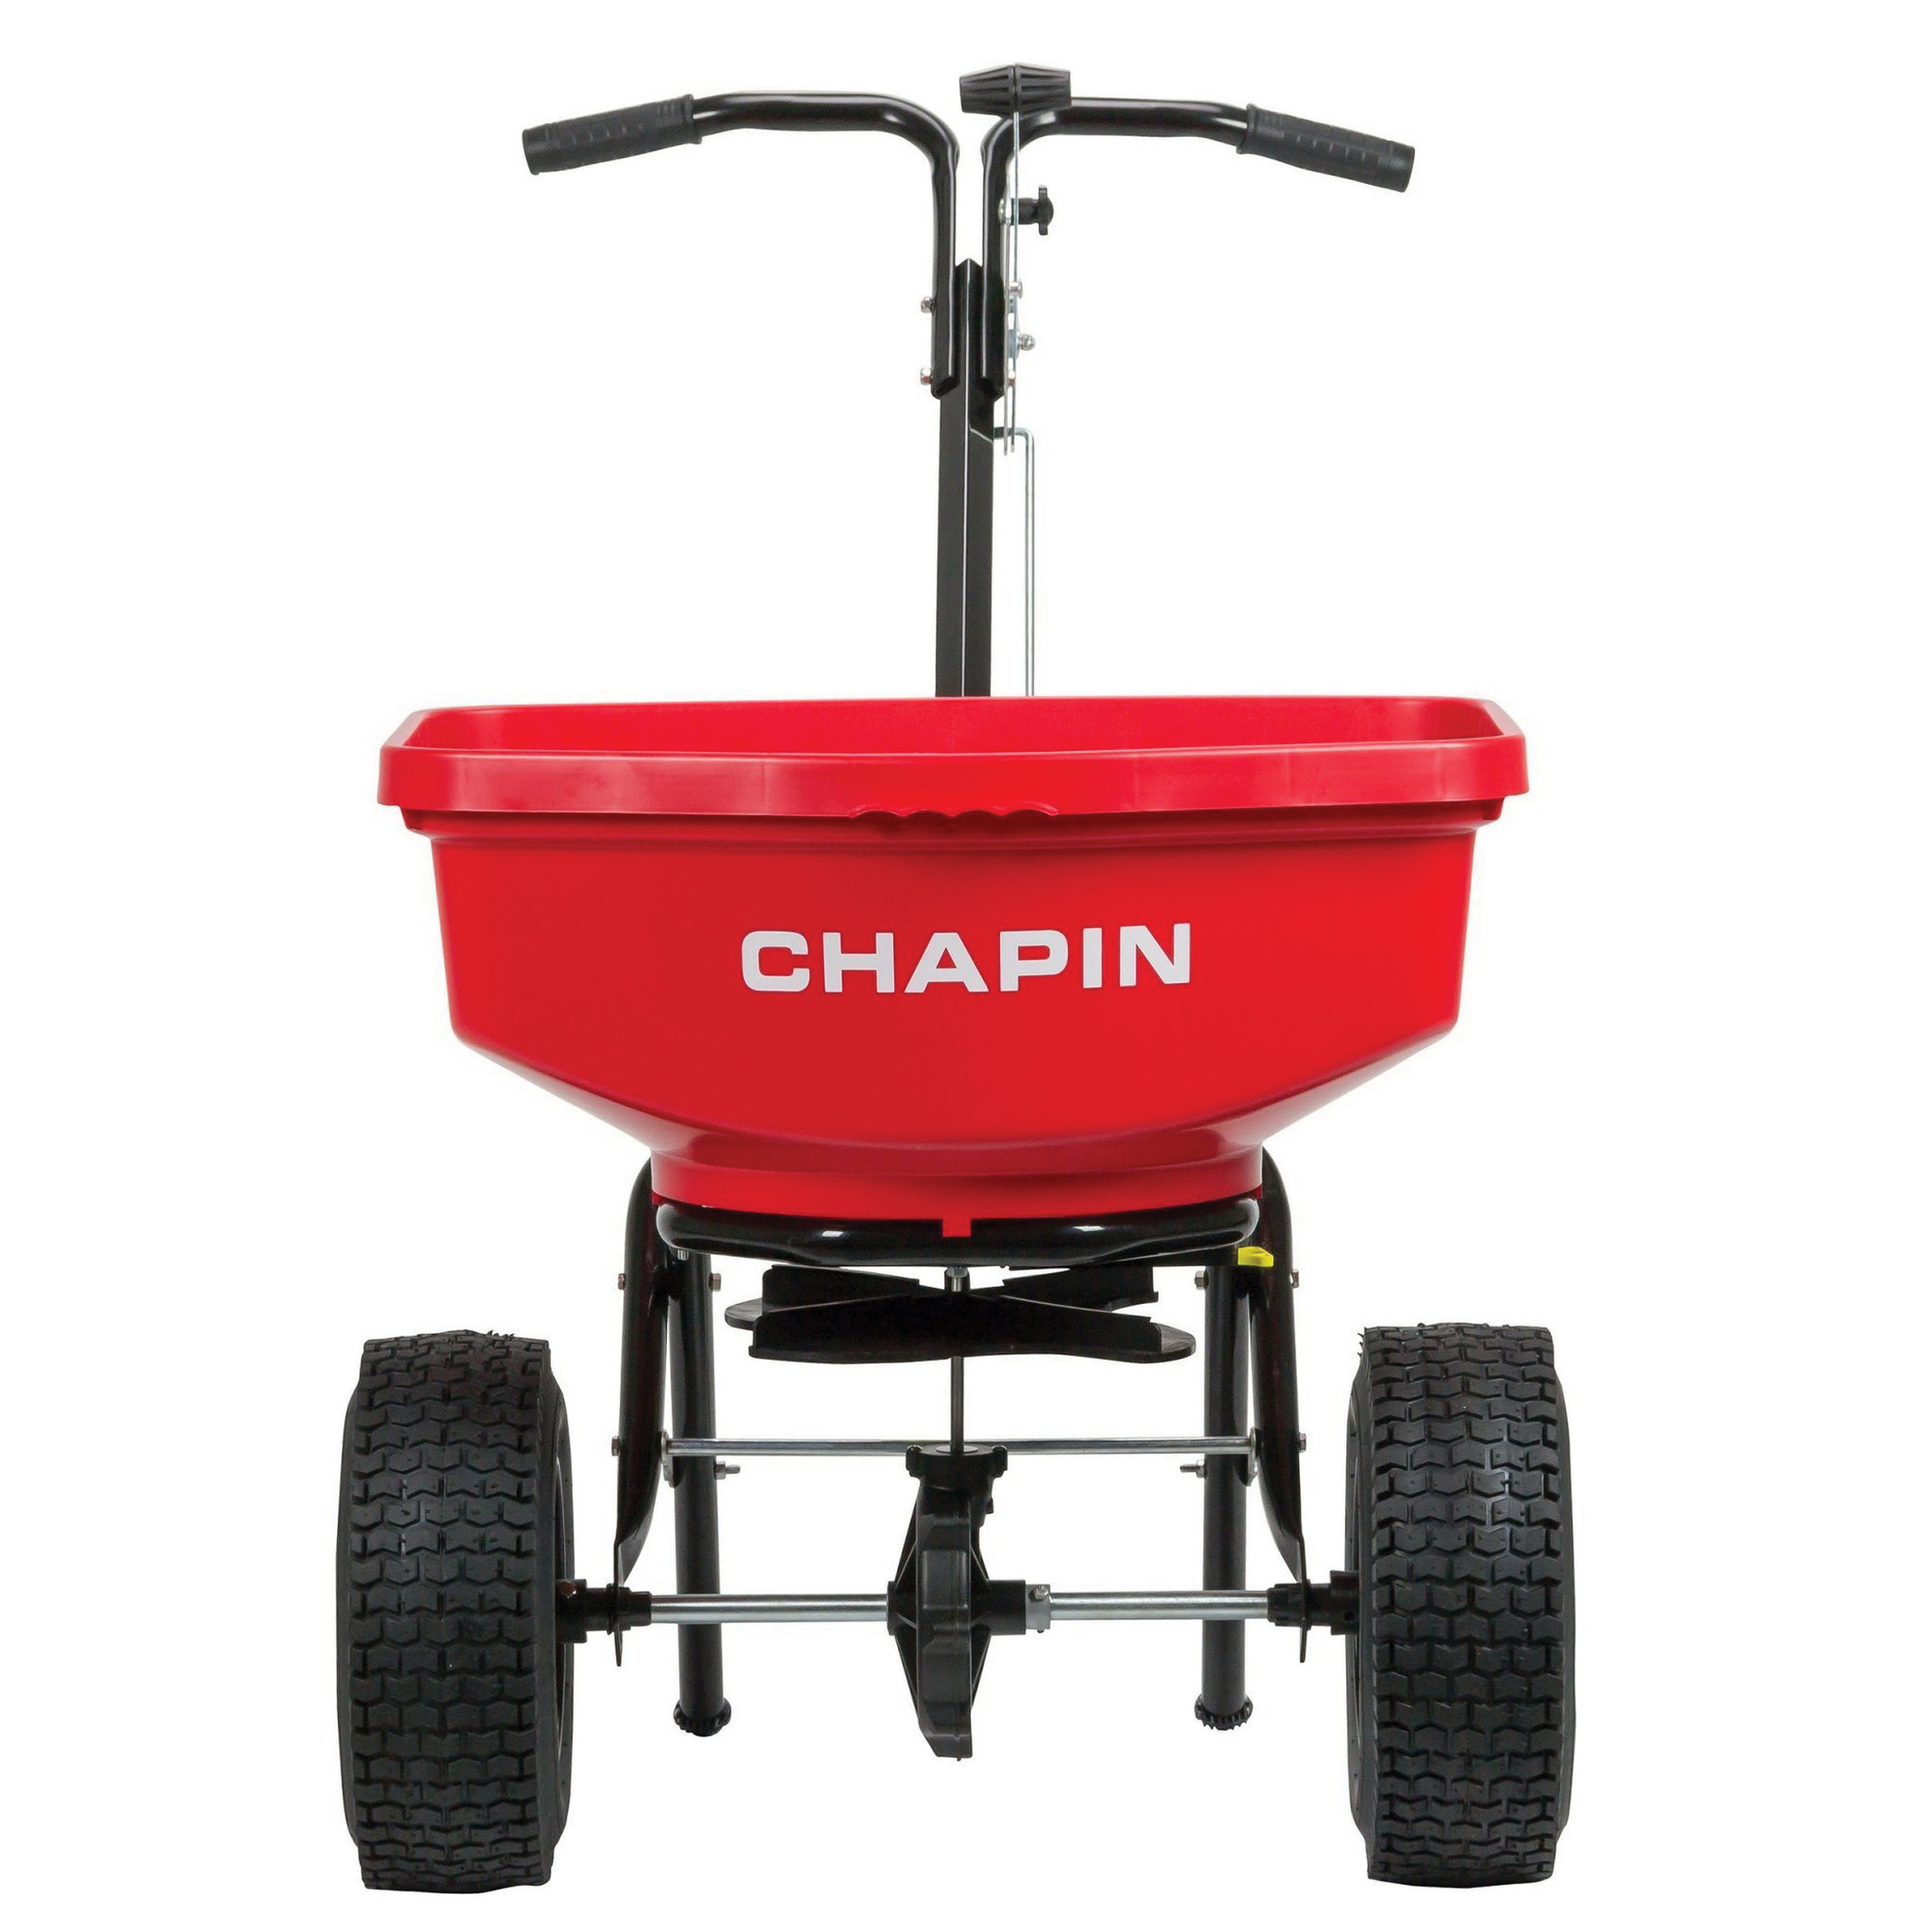 8301C Contractor Turf Spreader, 80 lb Capacity, Powder-Coated Steel Frame, Poly Hopper, Pneumatic Wheel